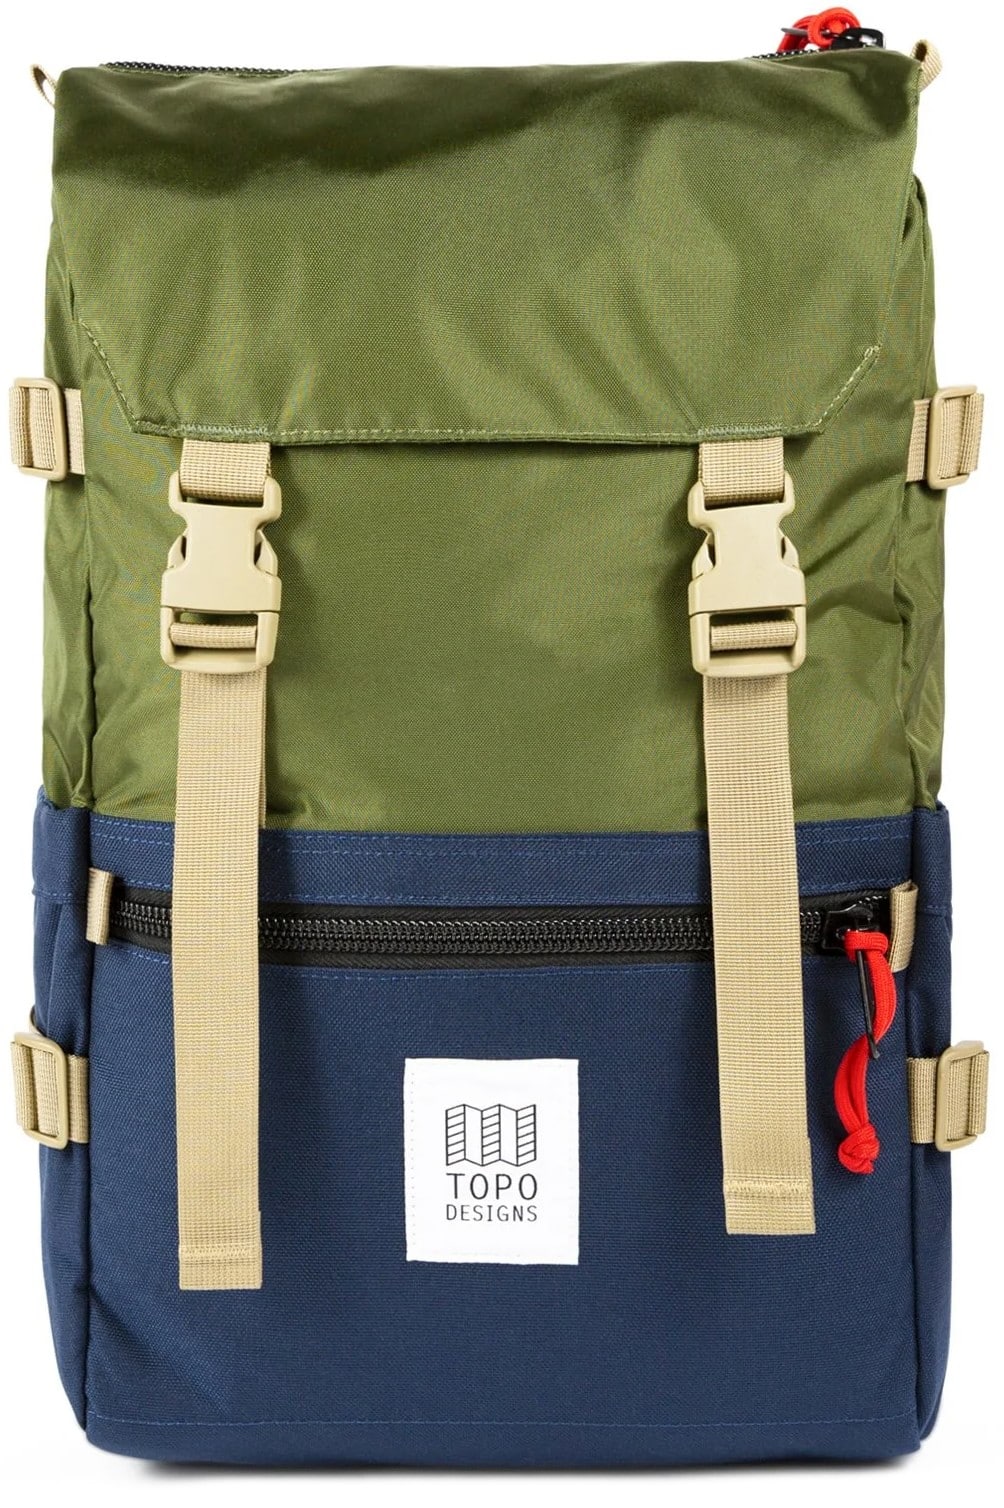 Topo Designs Rover Pack Classic Backpack - olive/navy | Tactics